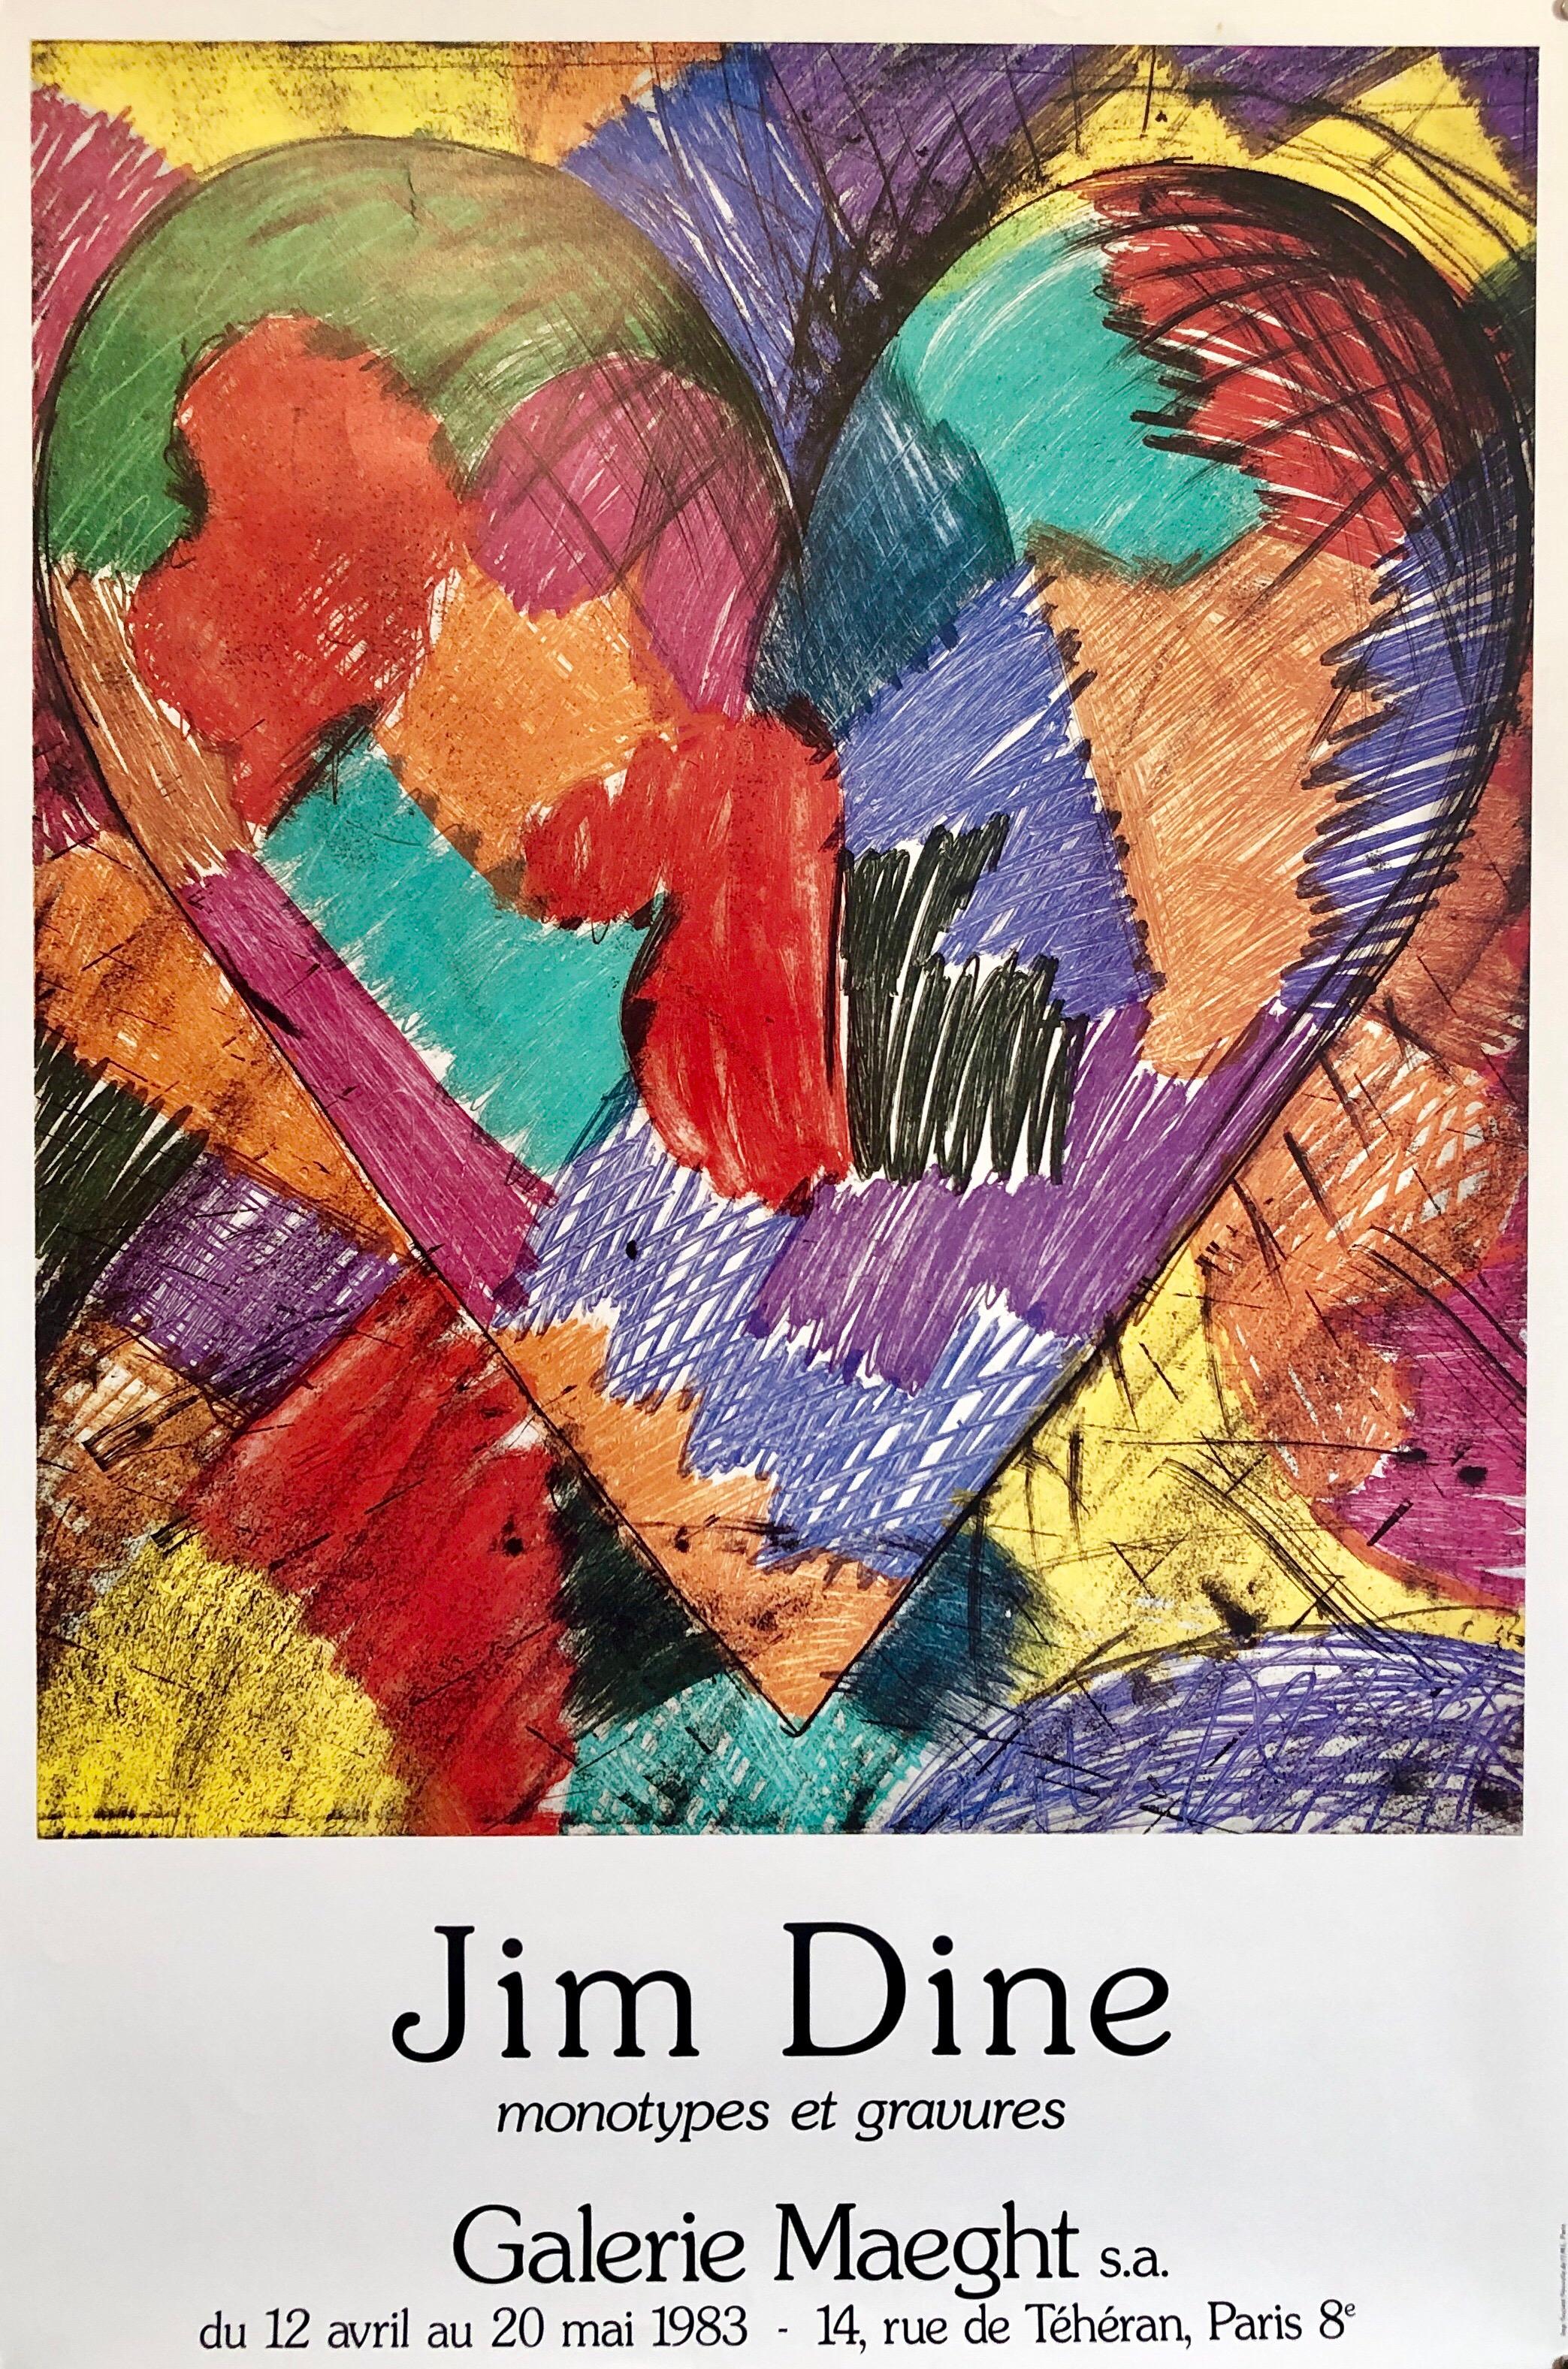 Jim Dine, Monotypes et Gravures, Galerie Maeght, Paris, 1983.
Vintage Offset Lithograph Poster American contemporary pop art.
A colorful heart quilt in a rainbow of colors.

Jim Dine (born June 16, 1935) is an American pop artist. He is sometimes